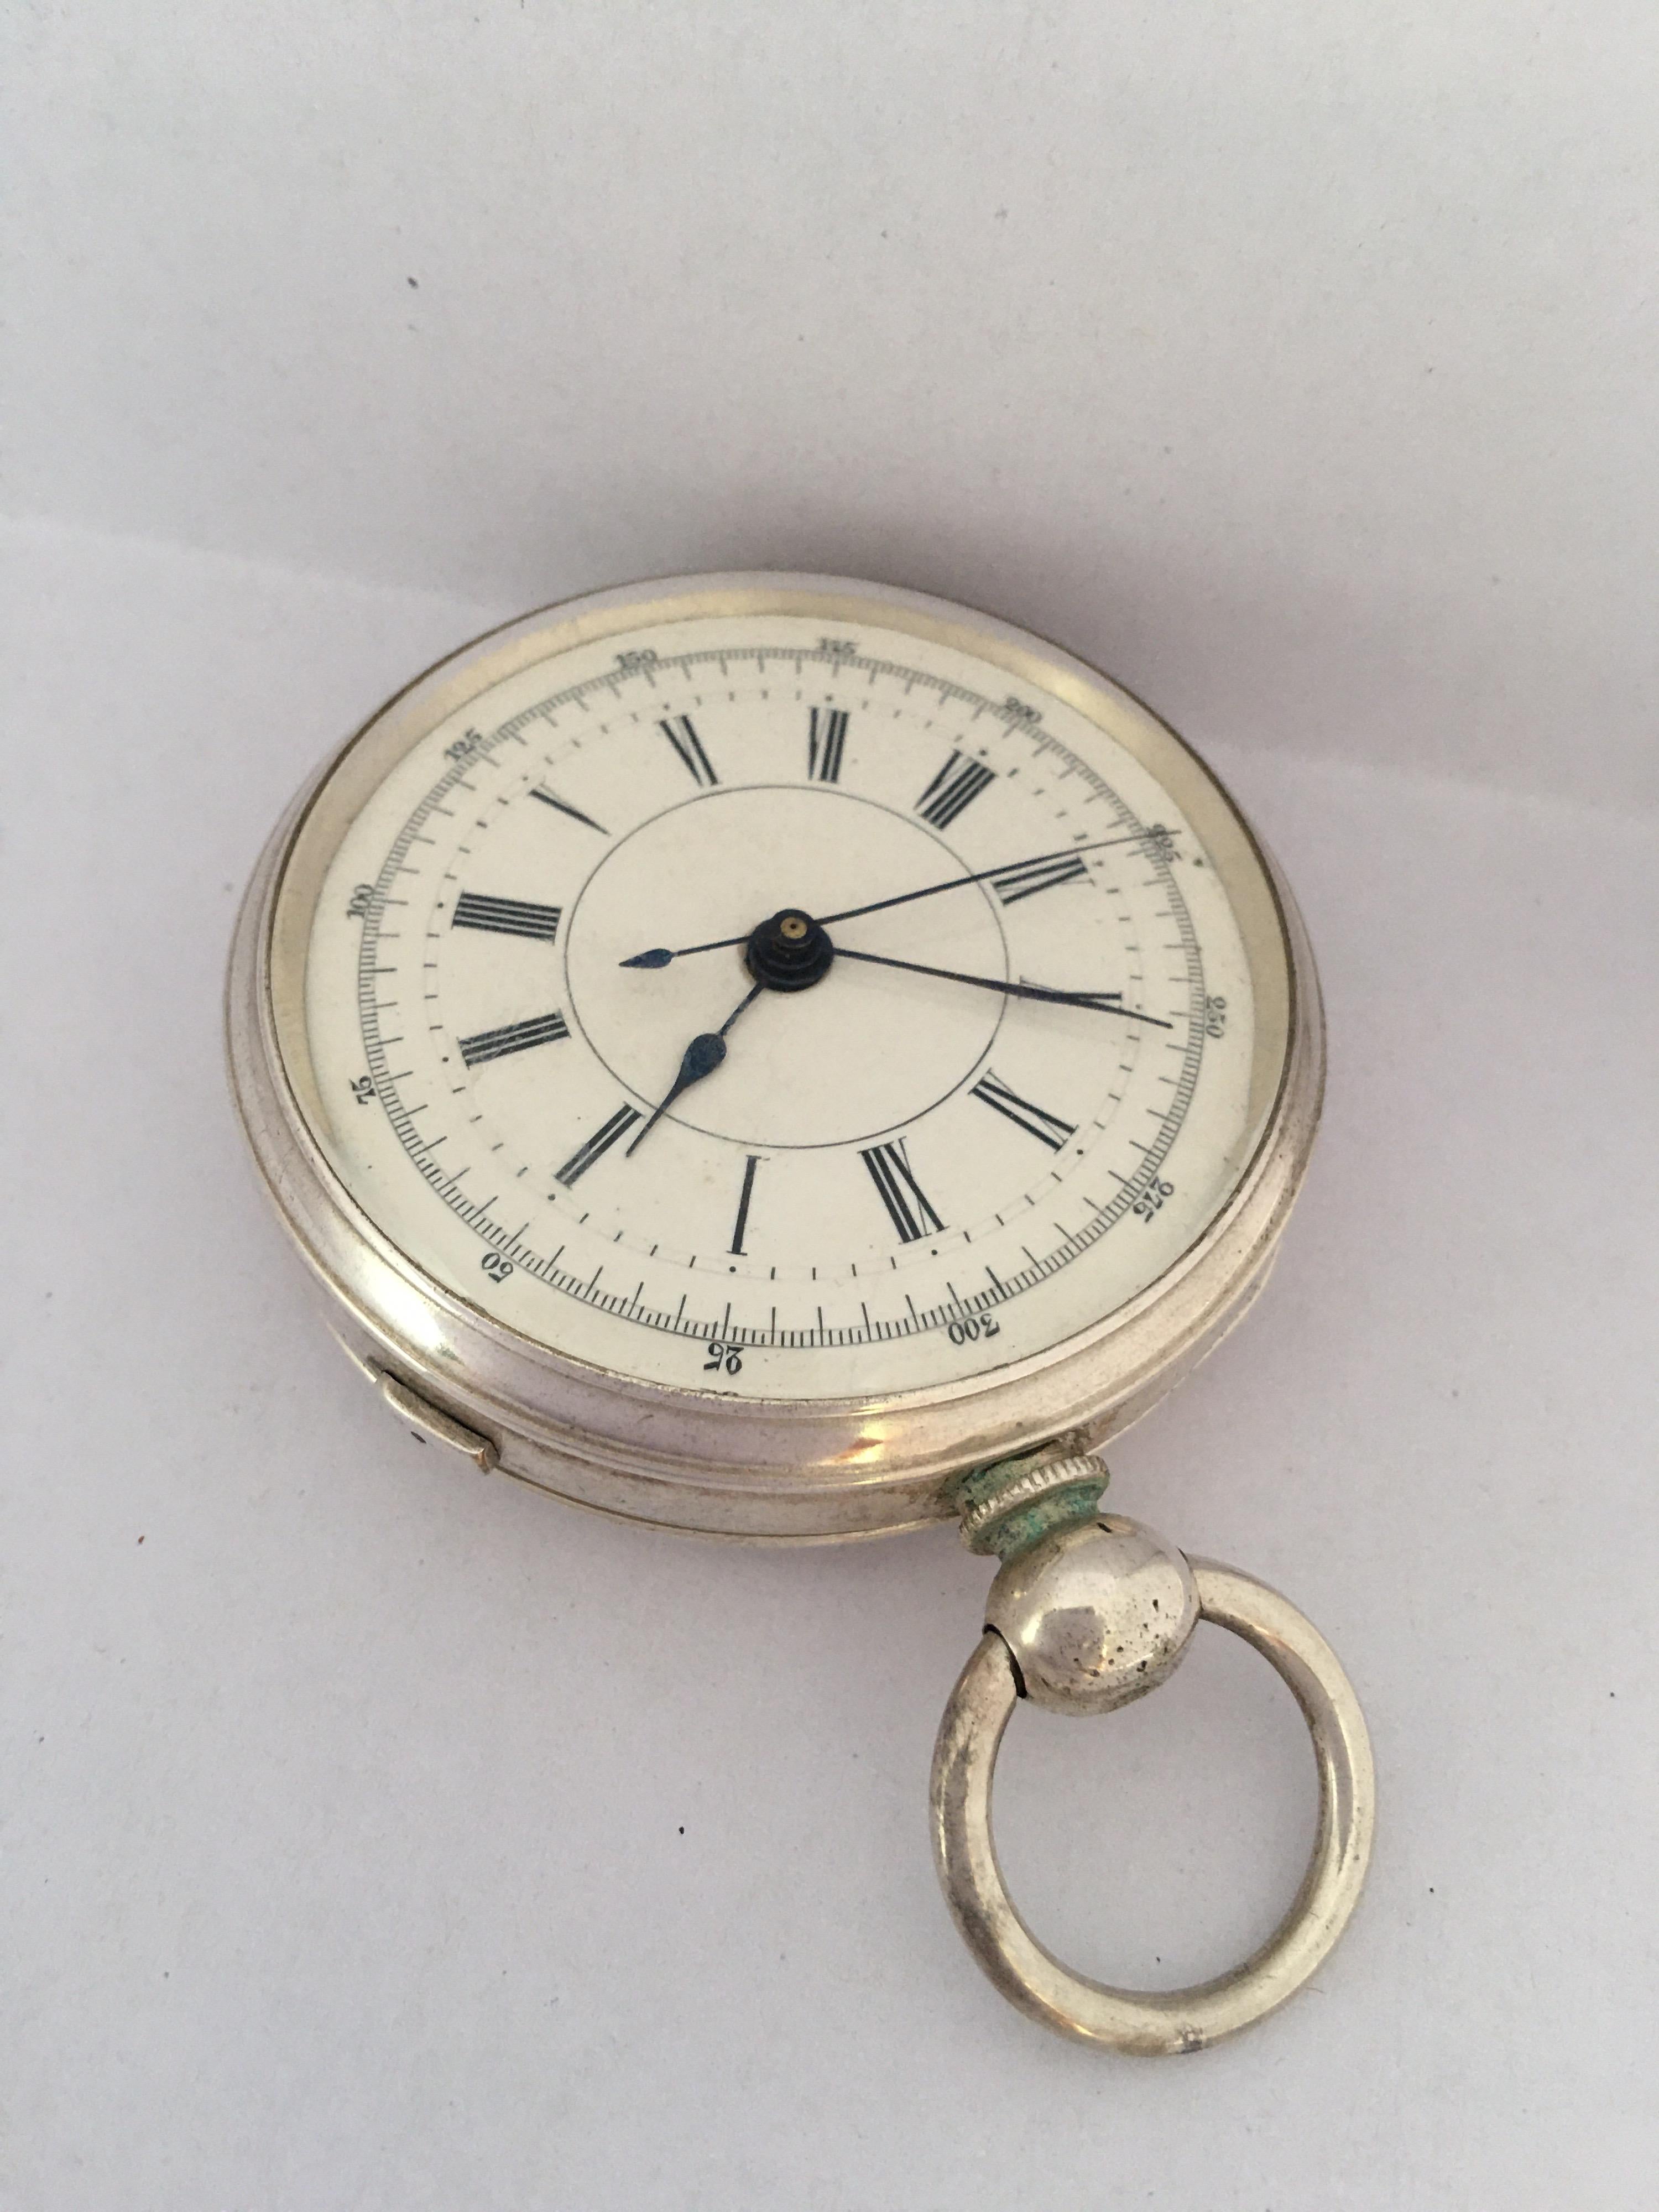 Antique Silver Plated Centre Seconds Chronograph Lever Pocket Watch For Sale 7